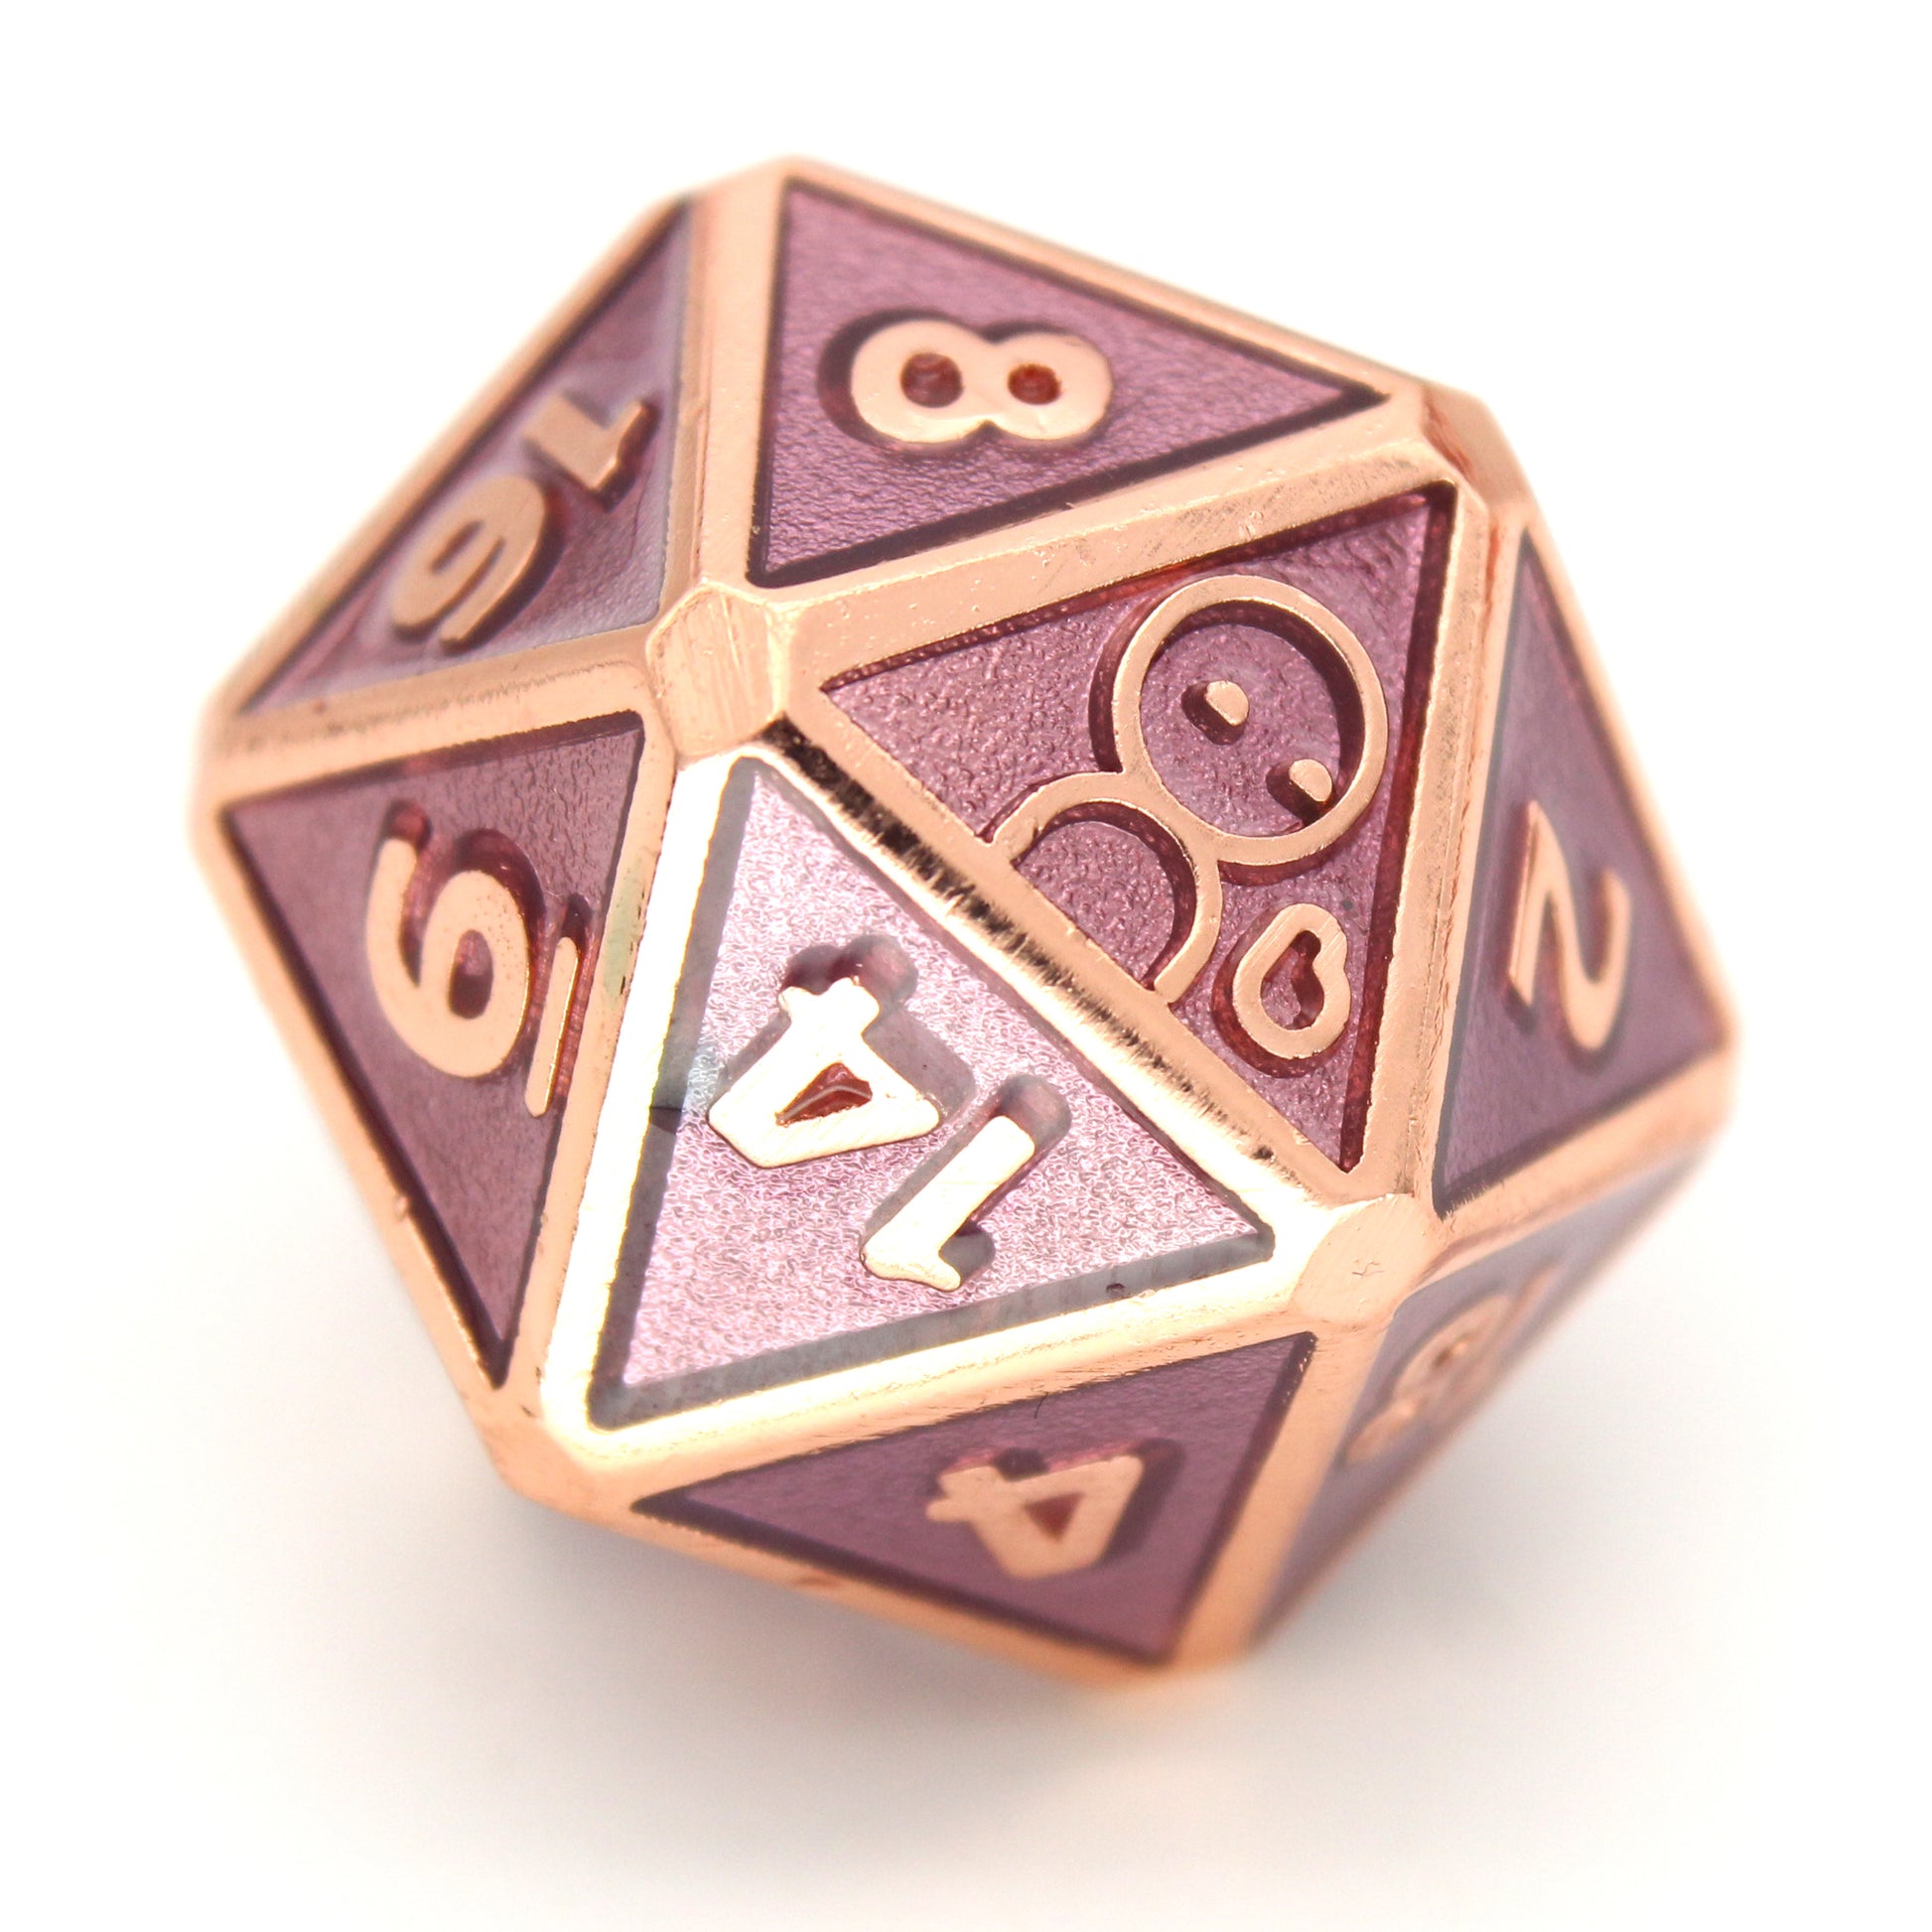 Dabarella is a 7-piece rose gold, framed metal set filled with a rich, mauve enamel, which comes in a collectible Adventure is Nigh branded dice wallet. It is part of the Adventure Is Nigh collection.